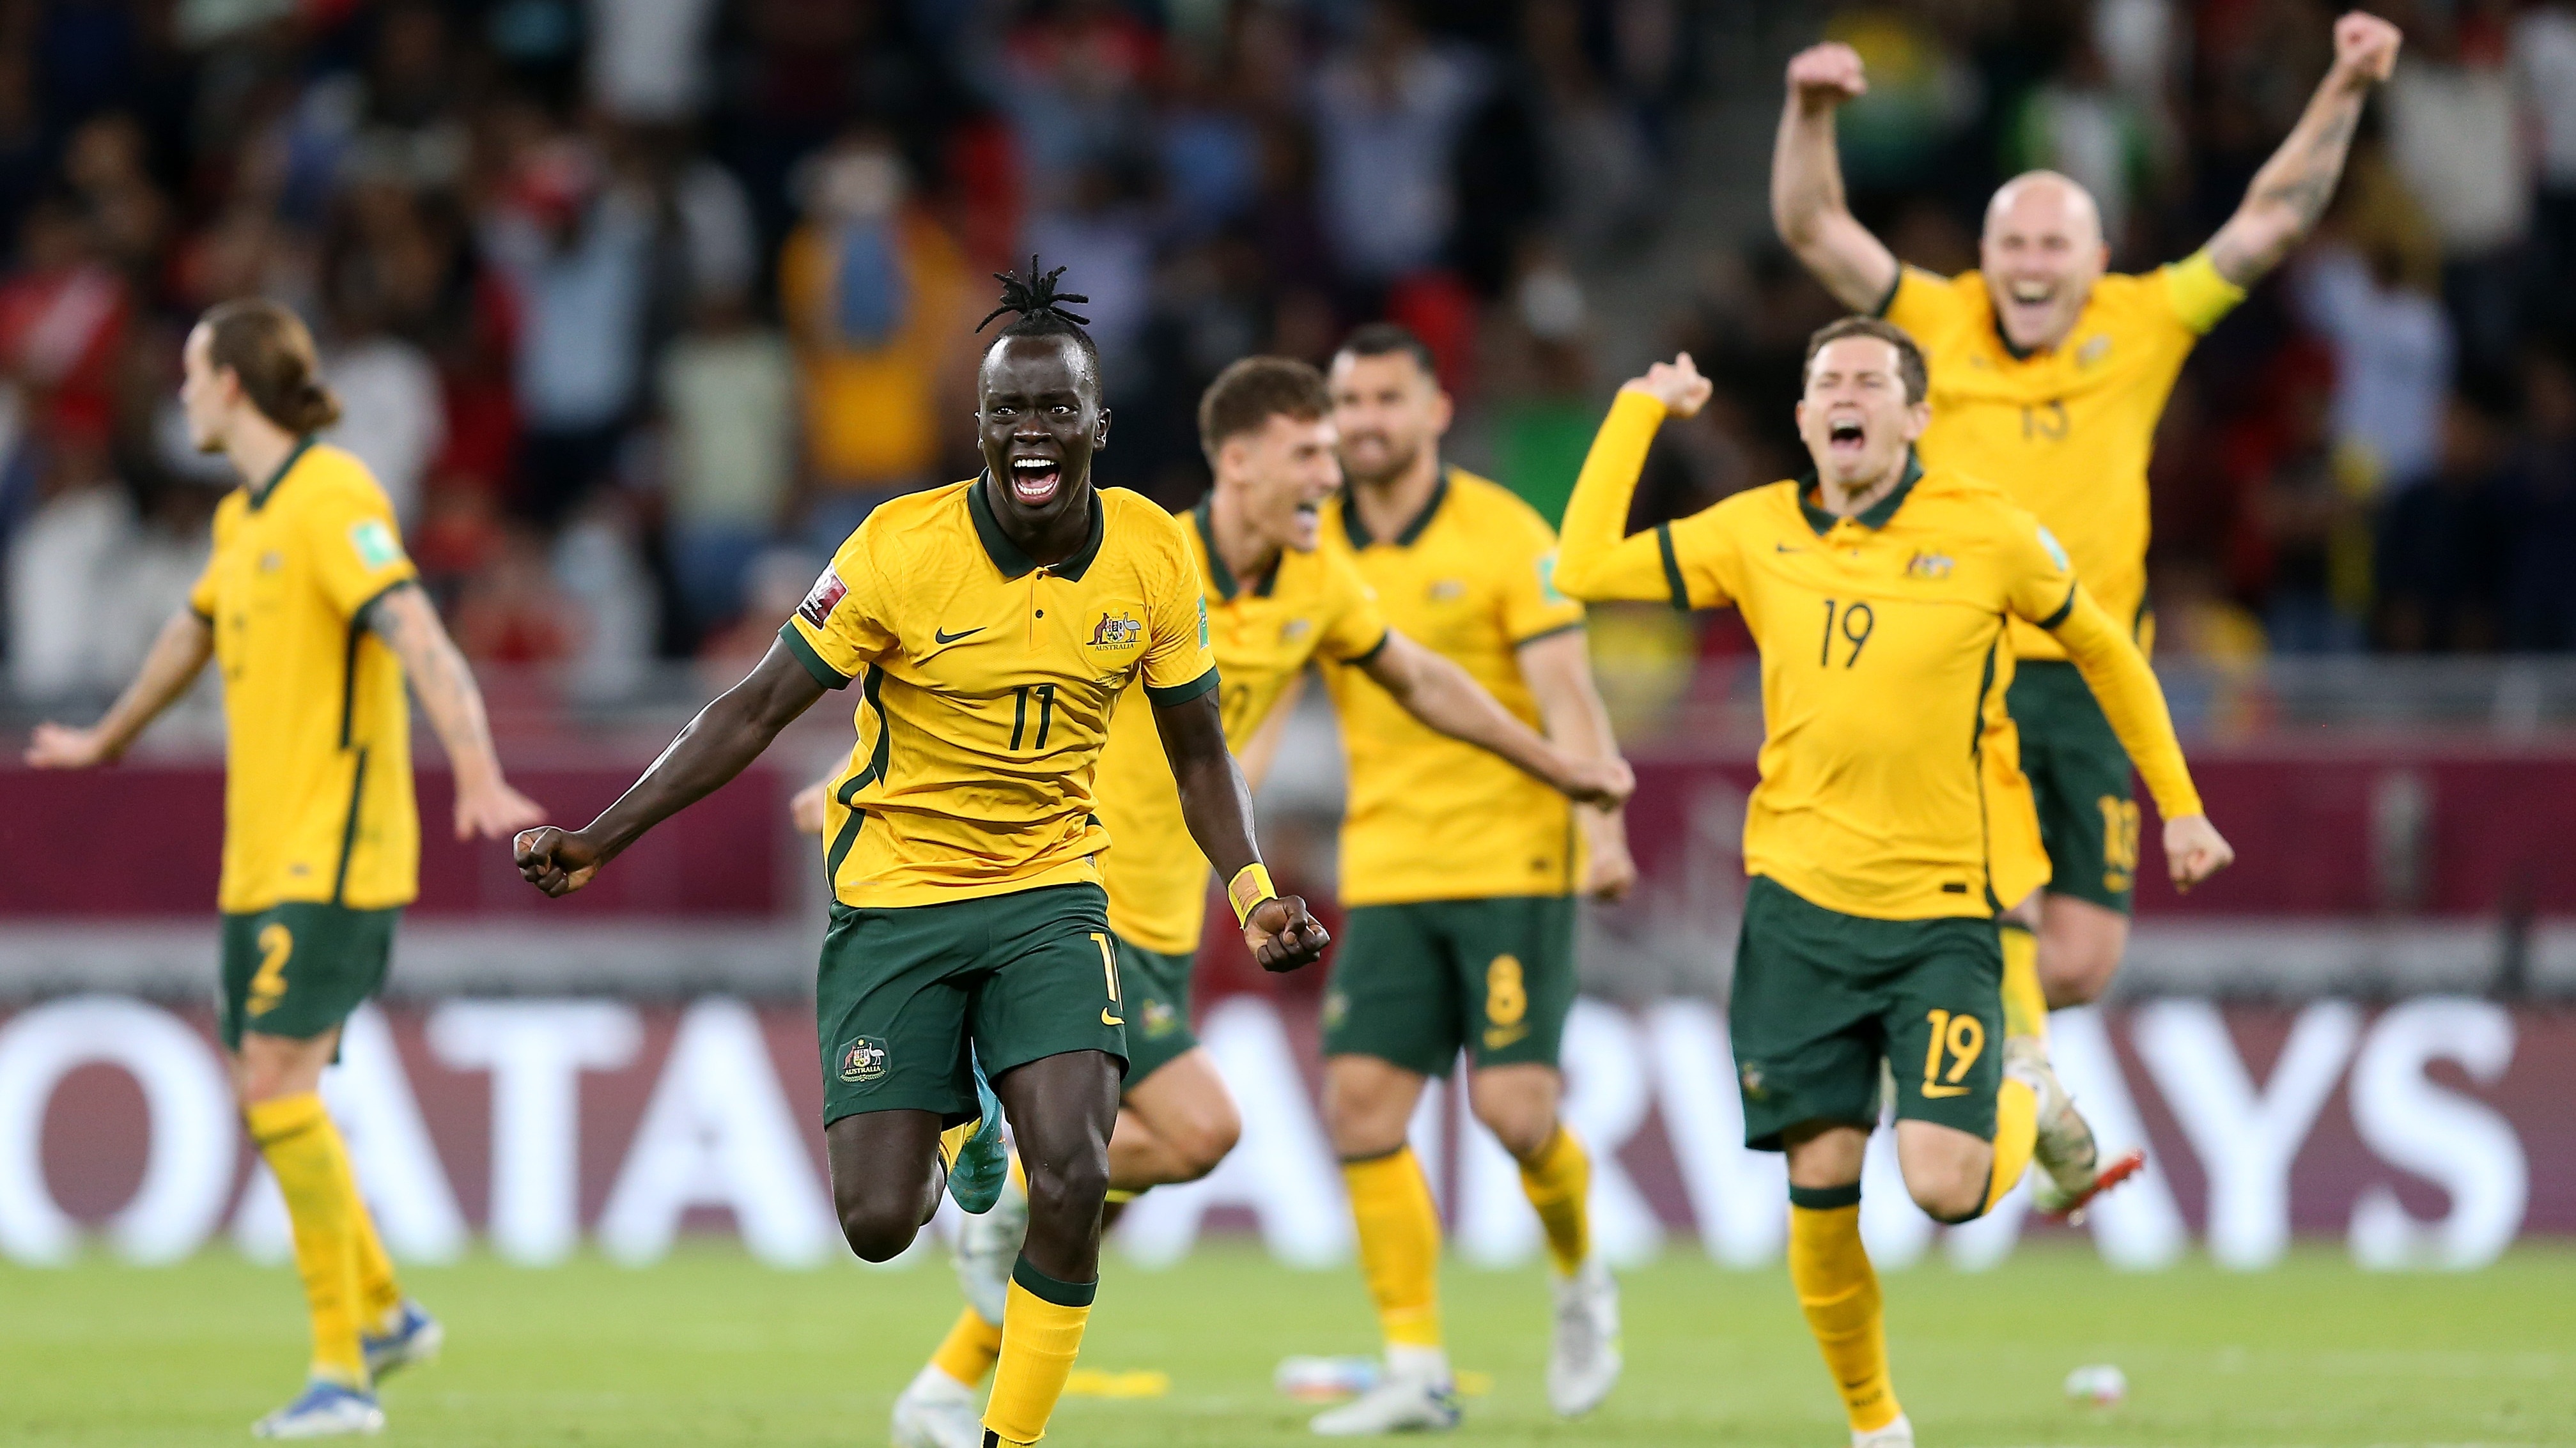 Watch: Key Moments from Socceroos v Peru